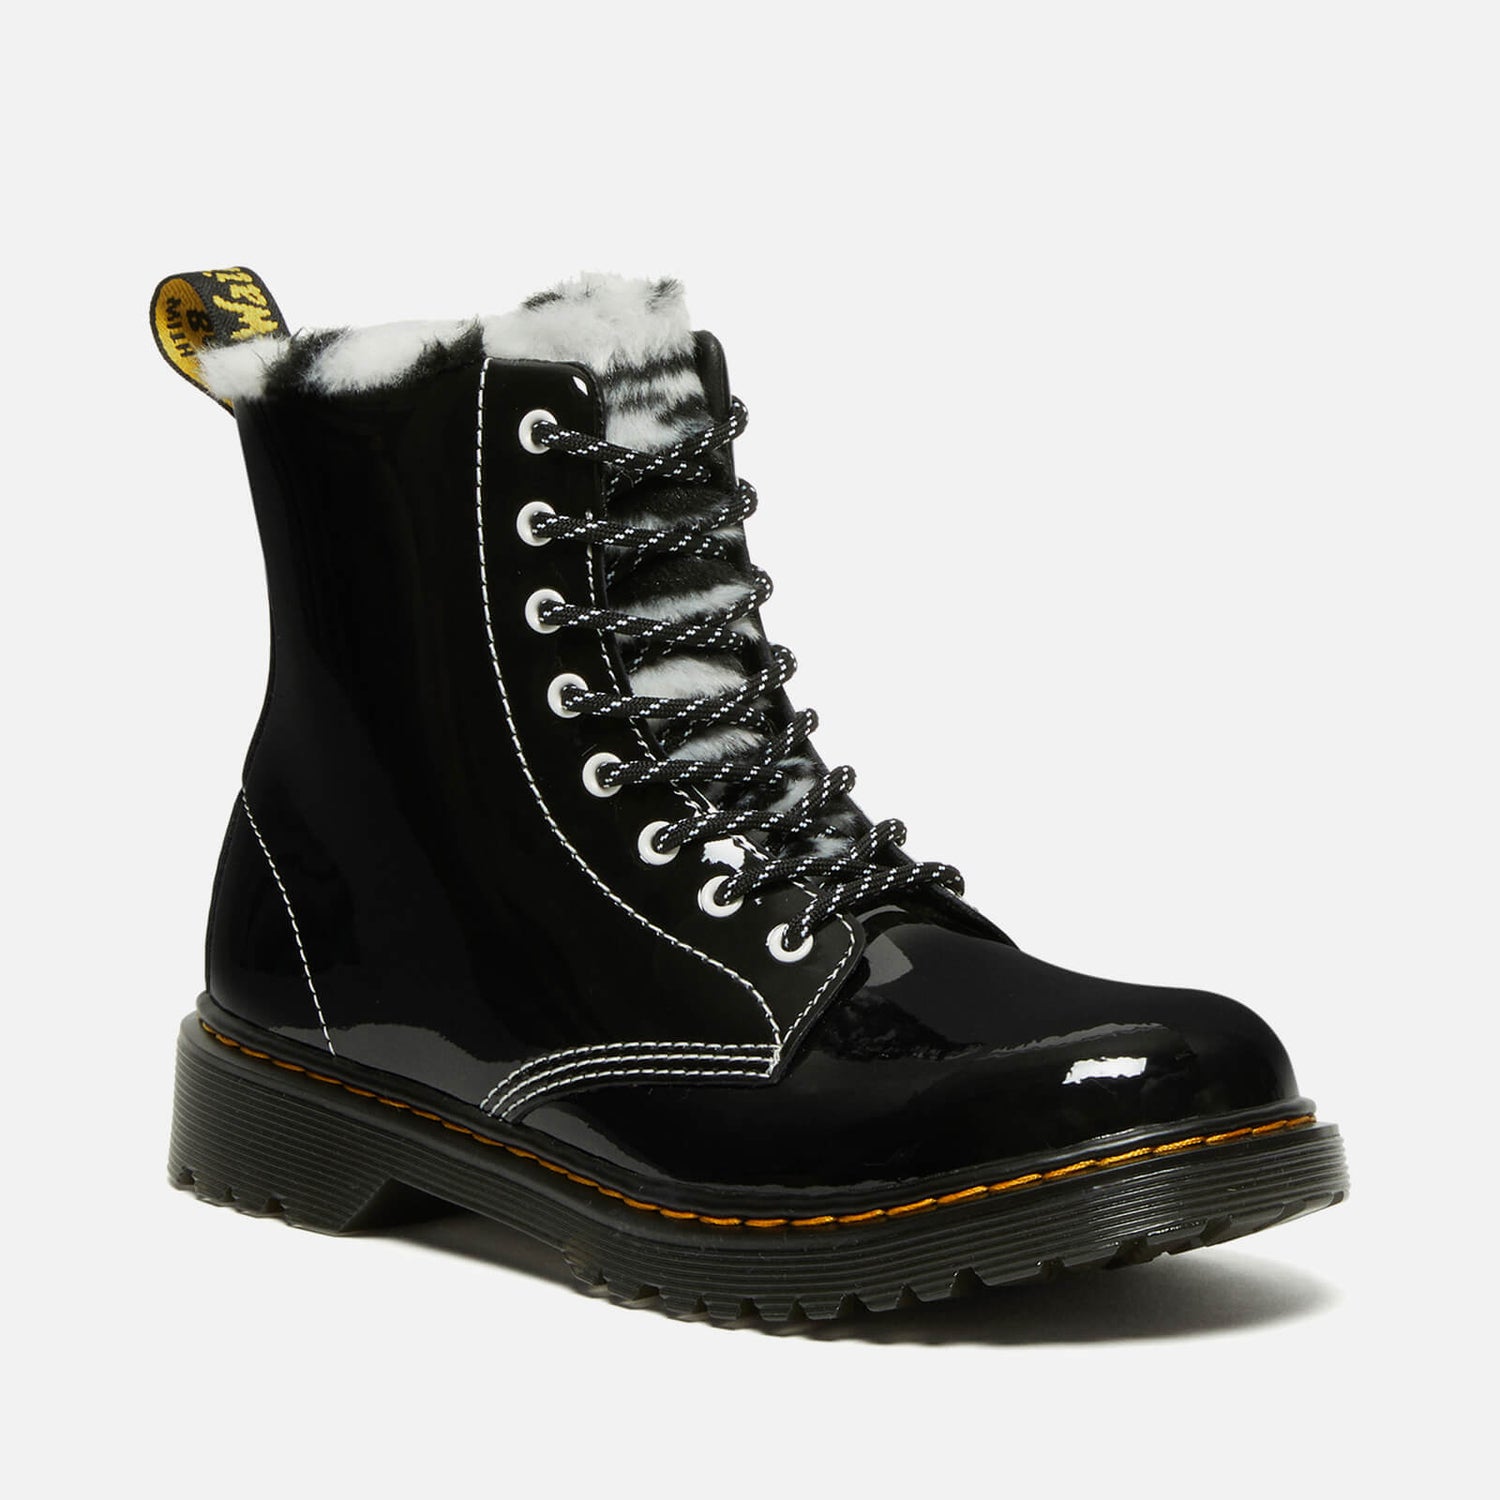 Dr. Martens Youth 1460 Serena Lamper Patent Leather Boots - UK 3 Kids